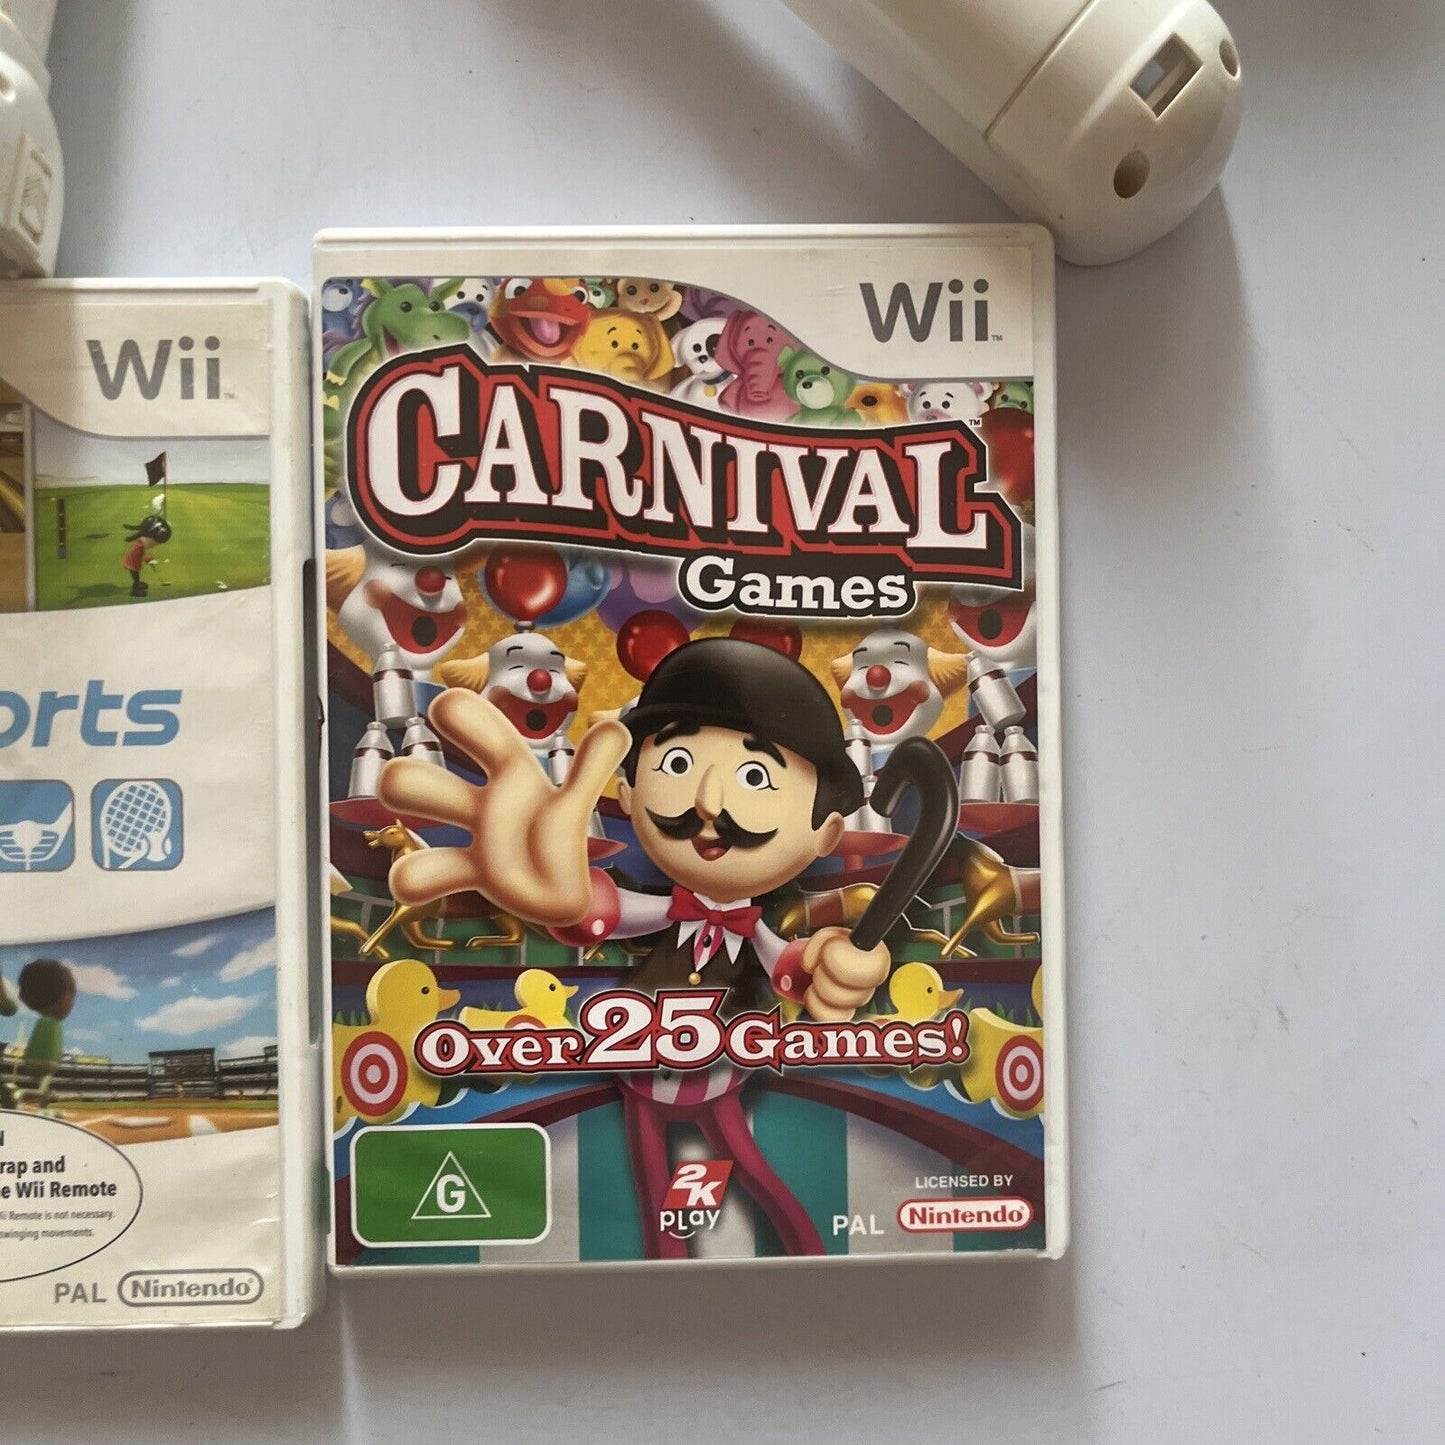 Wii Sports & Carnival Games Nintendo Wii With Accessories Bat, Golf Club PAL